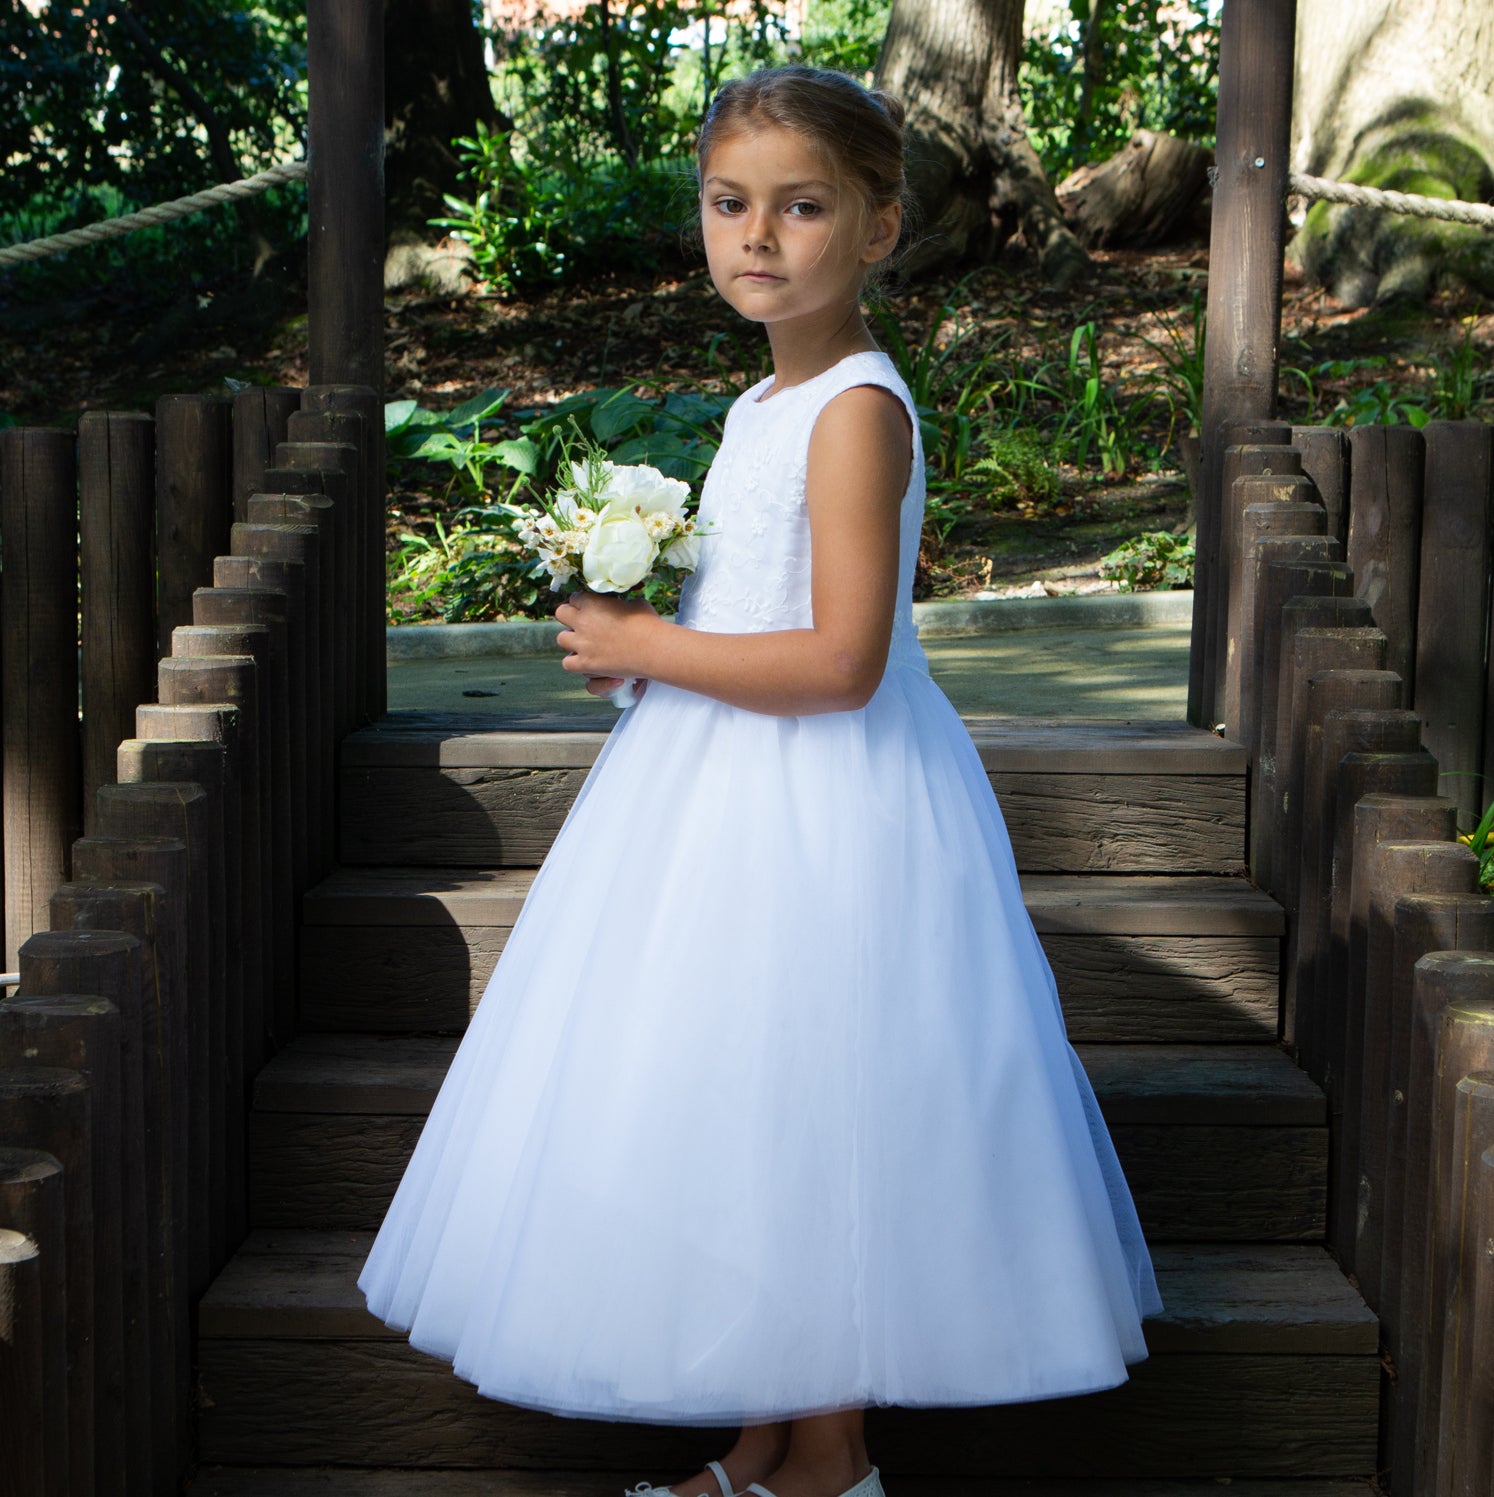 Shop Flower Girl Dresses at Sue Hill Childrenswear | Sue Hill Childrenswear